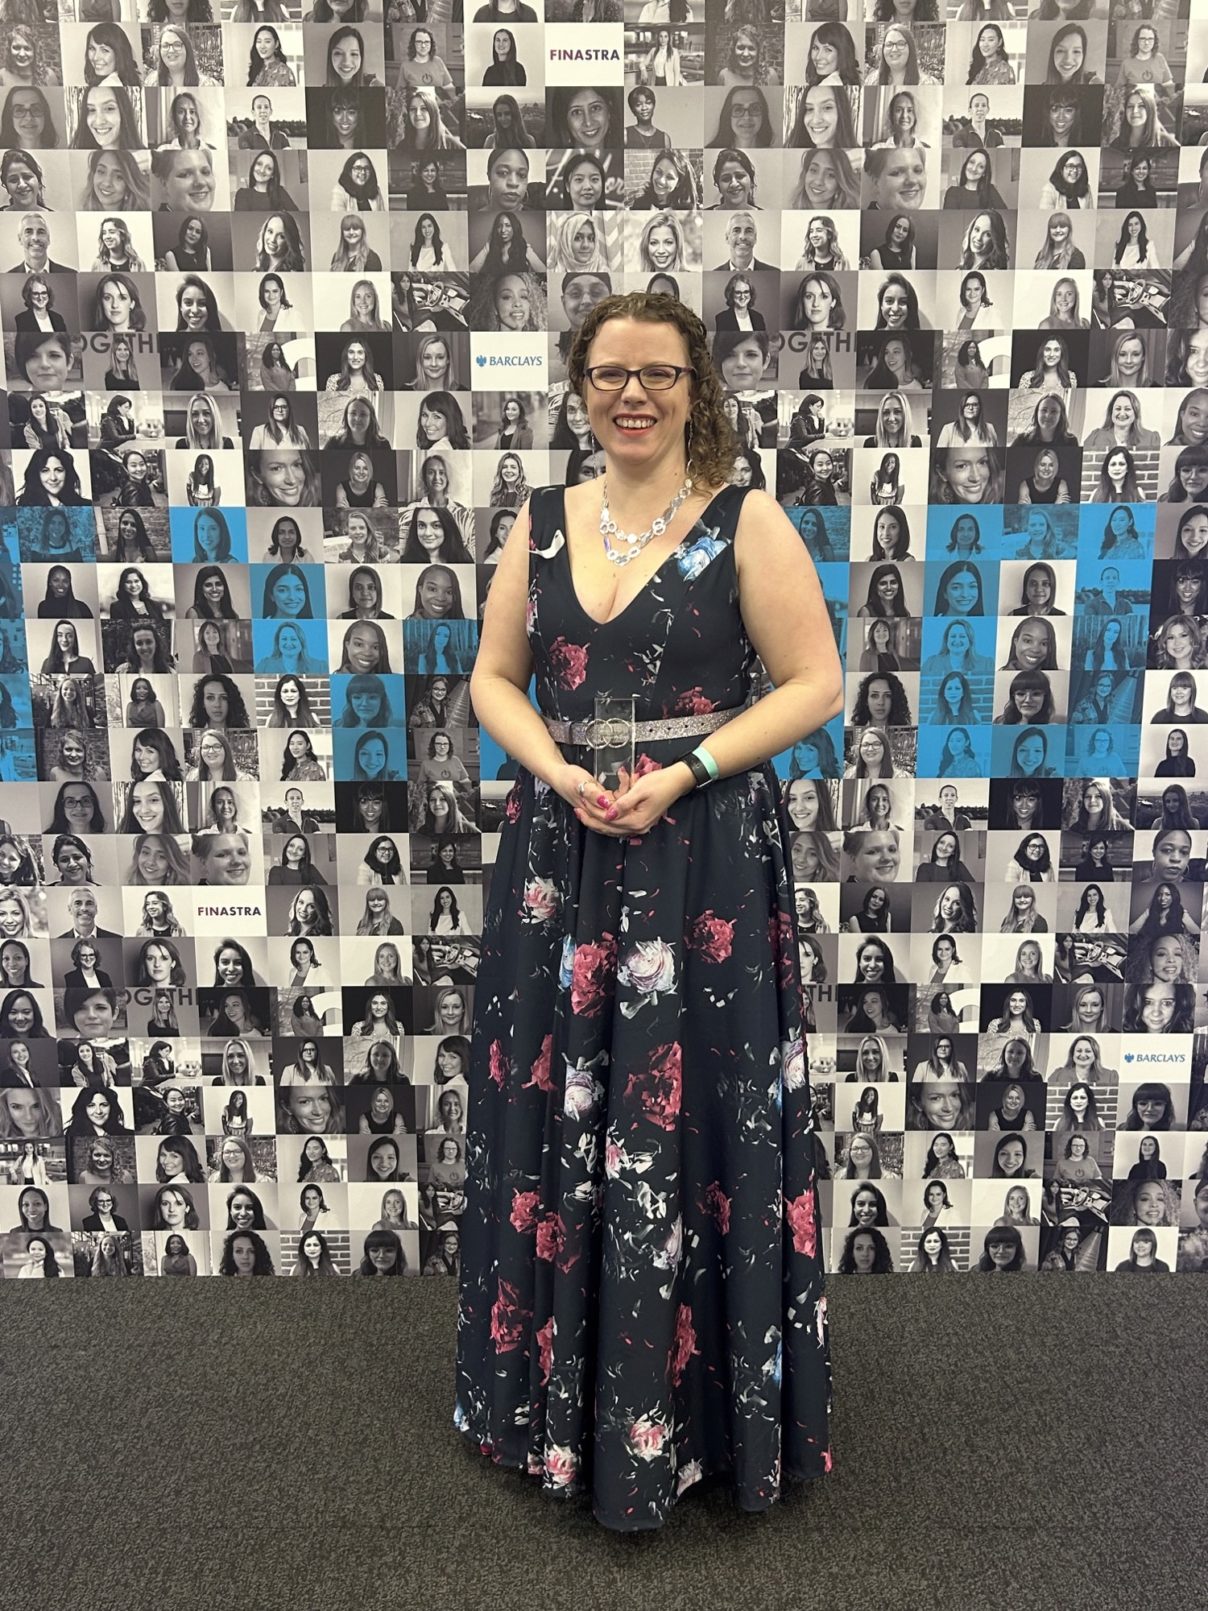 Johanna Waite has received a TechWomen100 award and recognised as one of the Top 100 Women in Tech by We are Tech Women.